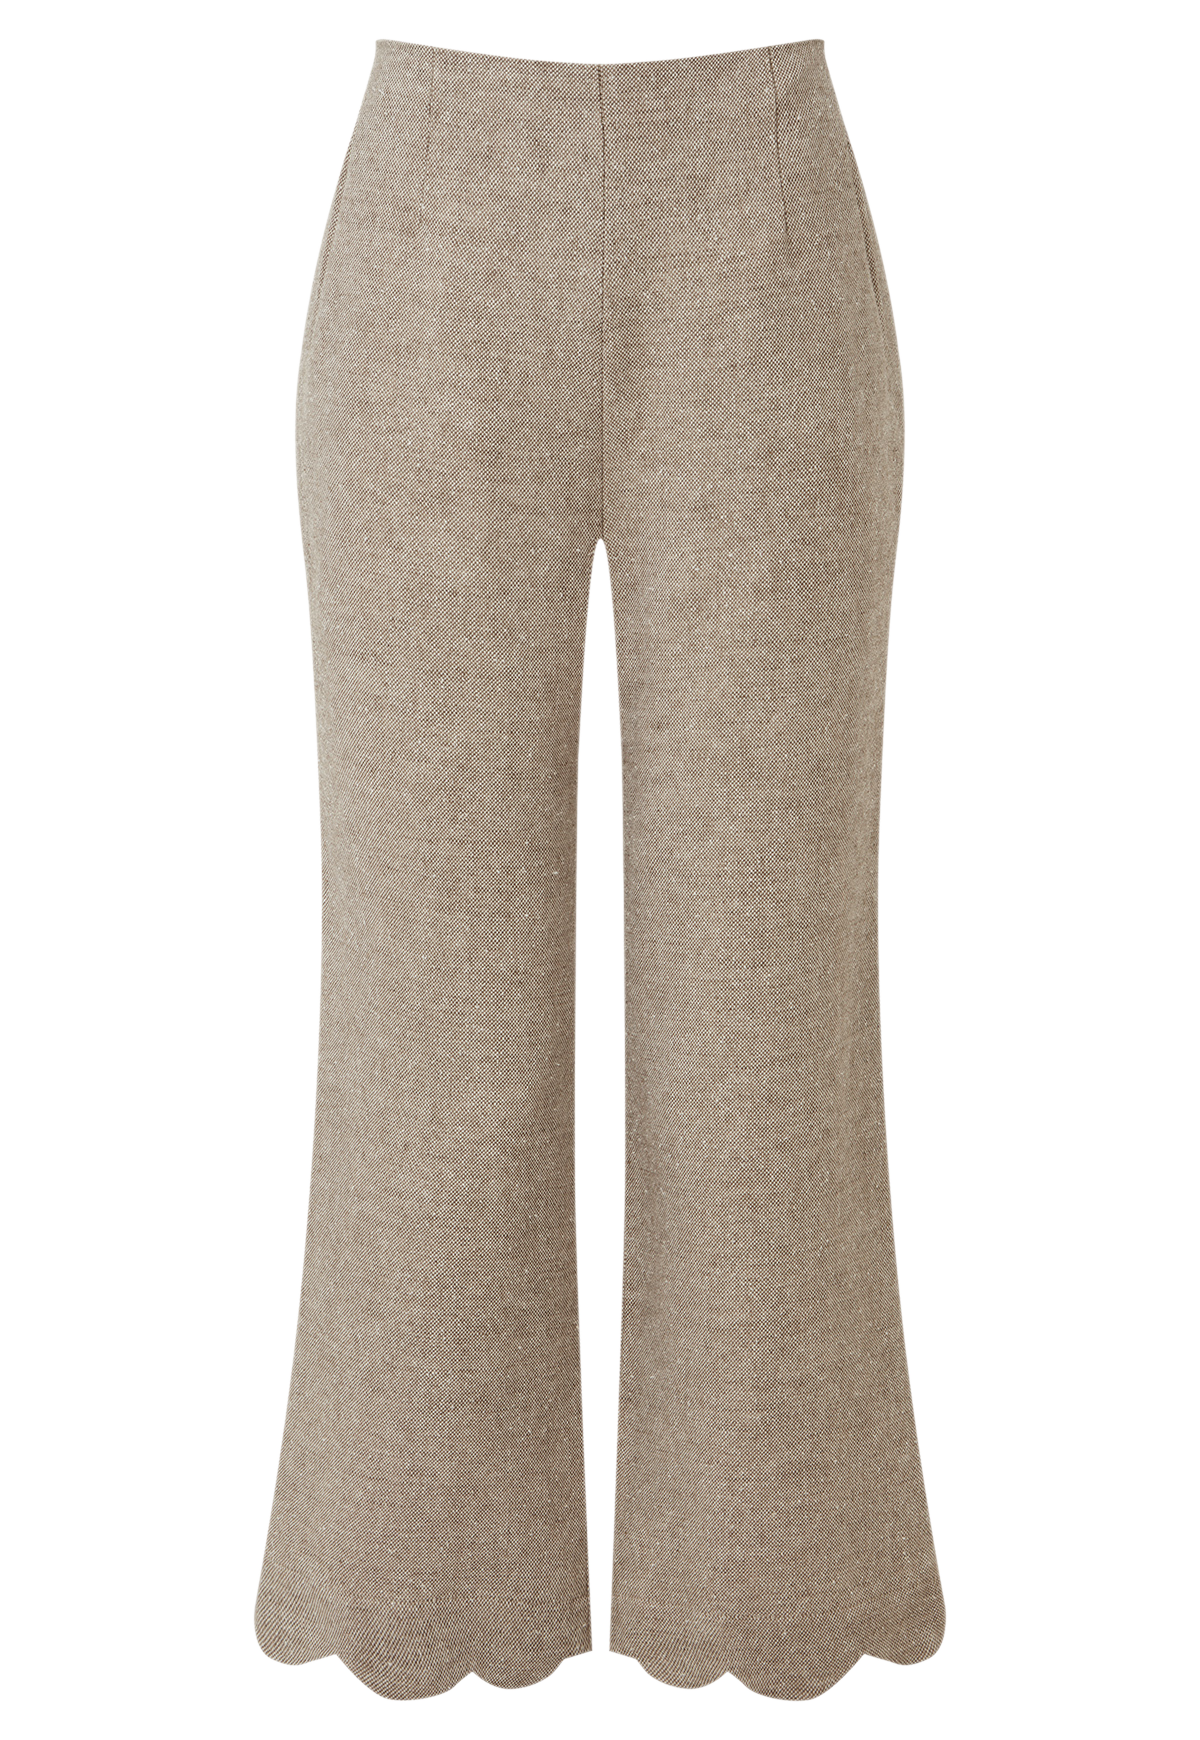 THE SCALLOP PANT in BROWN SUMMER TWEED LINEN